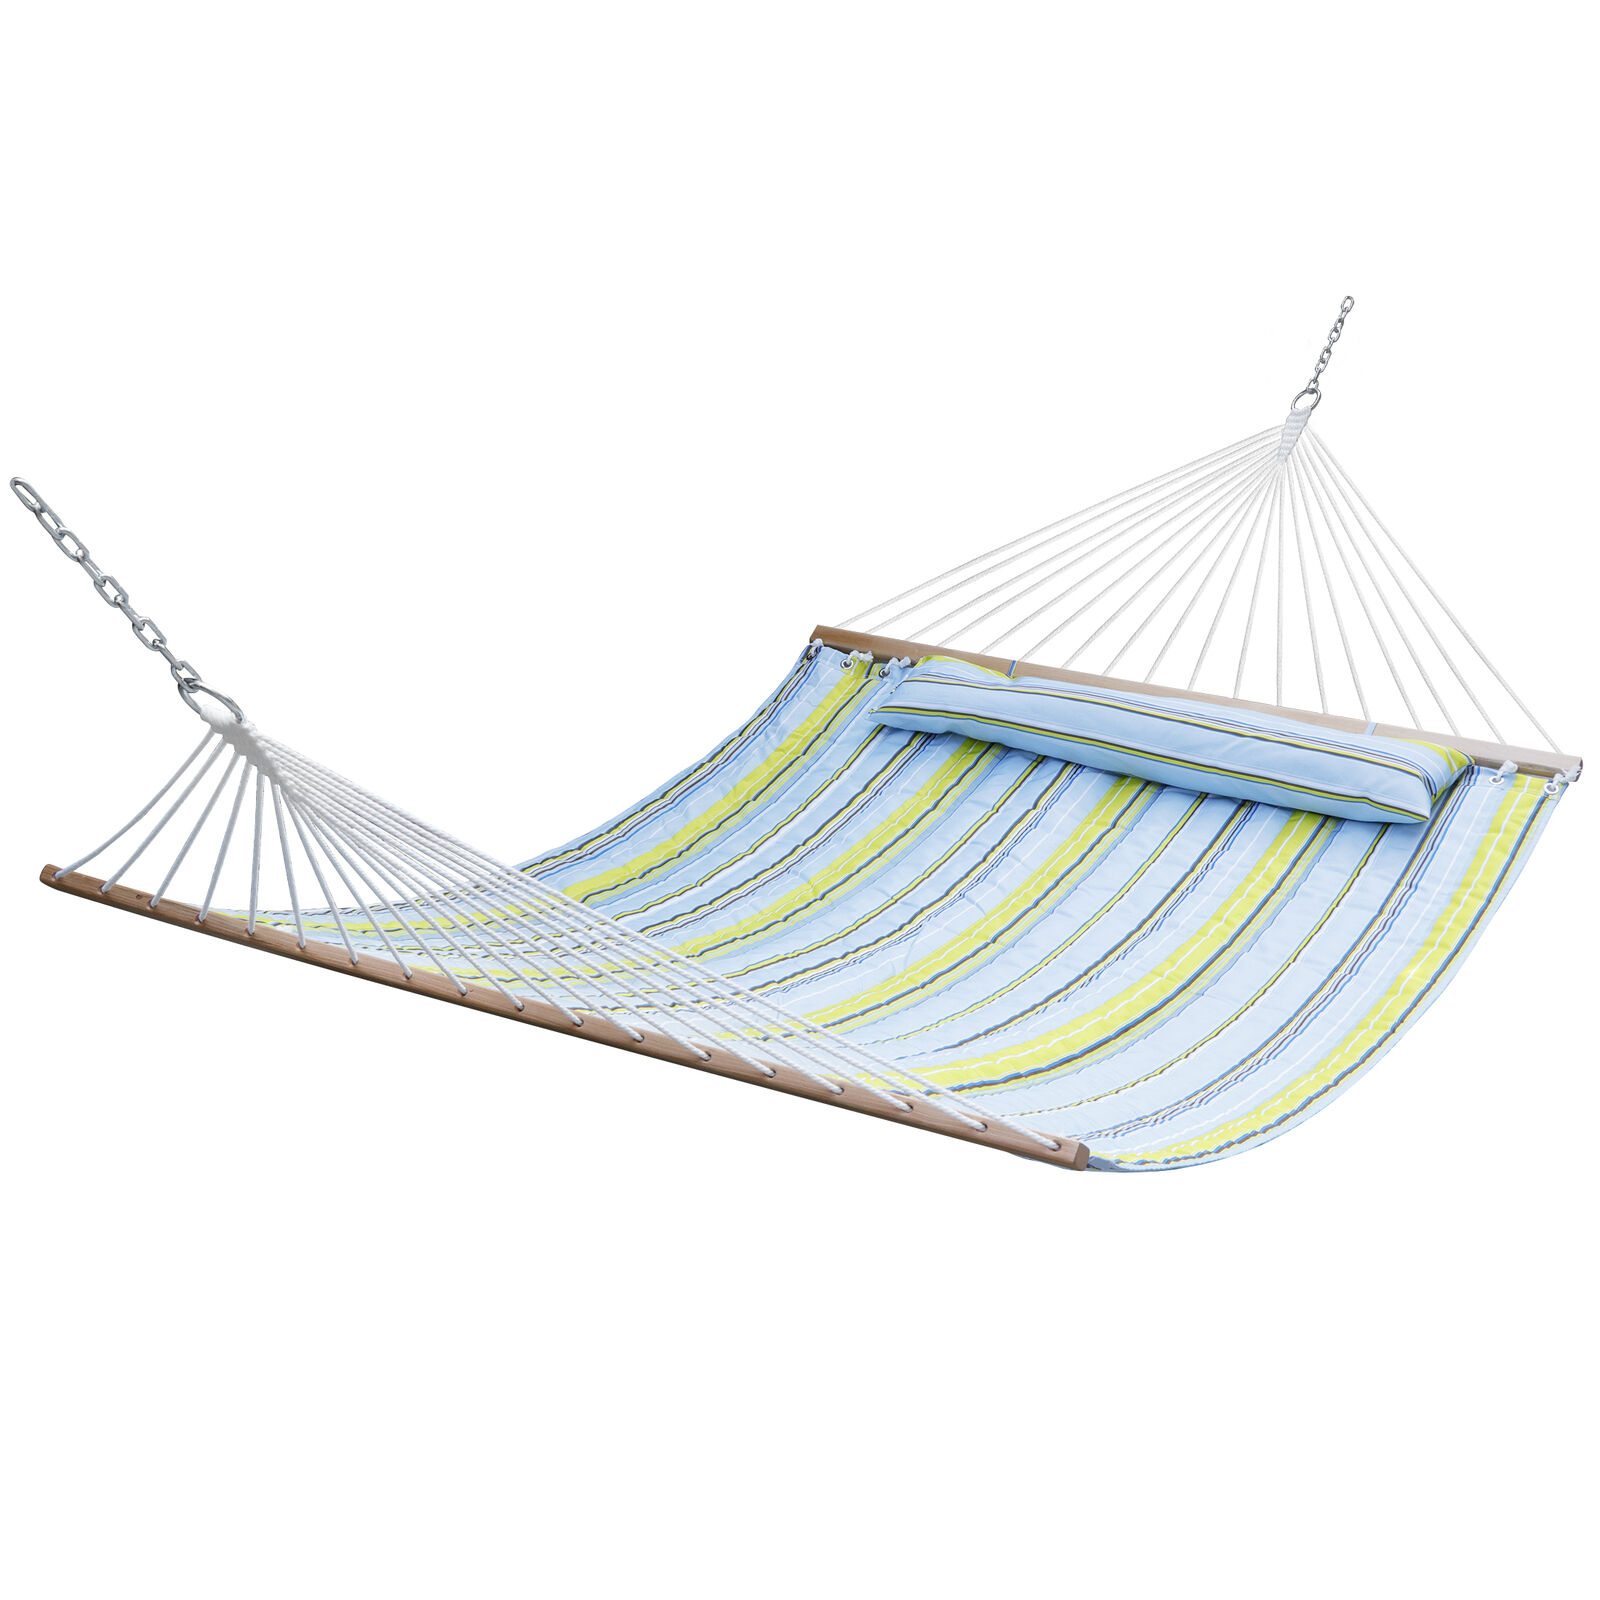 Double Hammock Quilted Fabric with Detachable Pillow Spreader Bar Heavy Duty